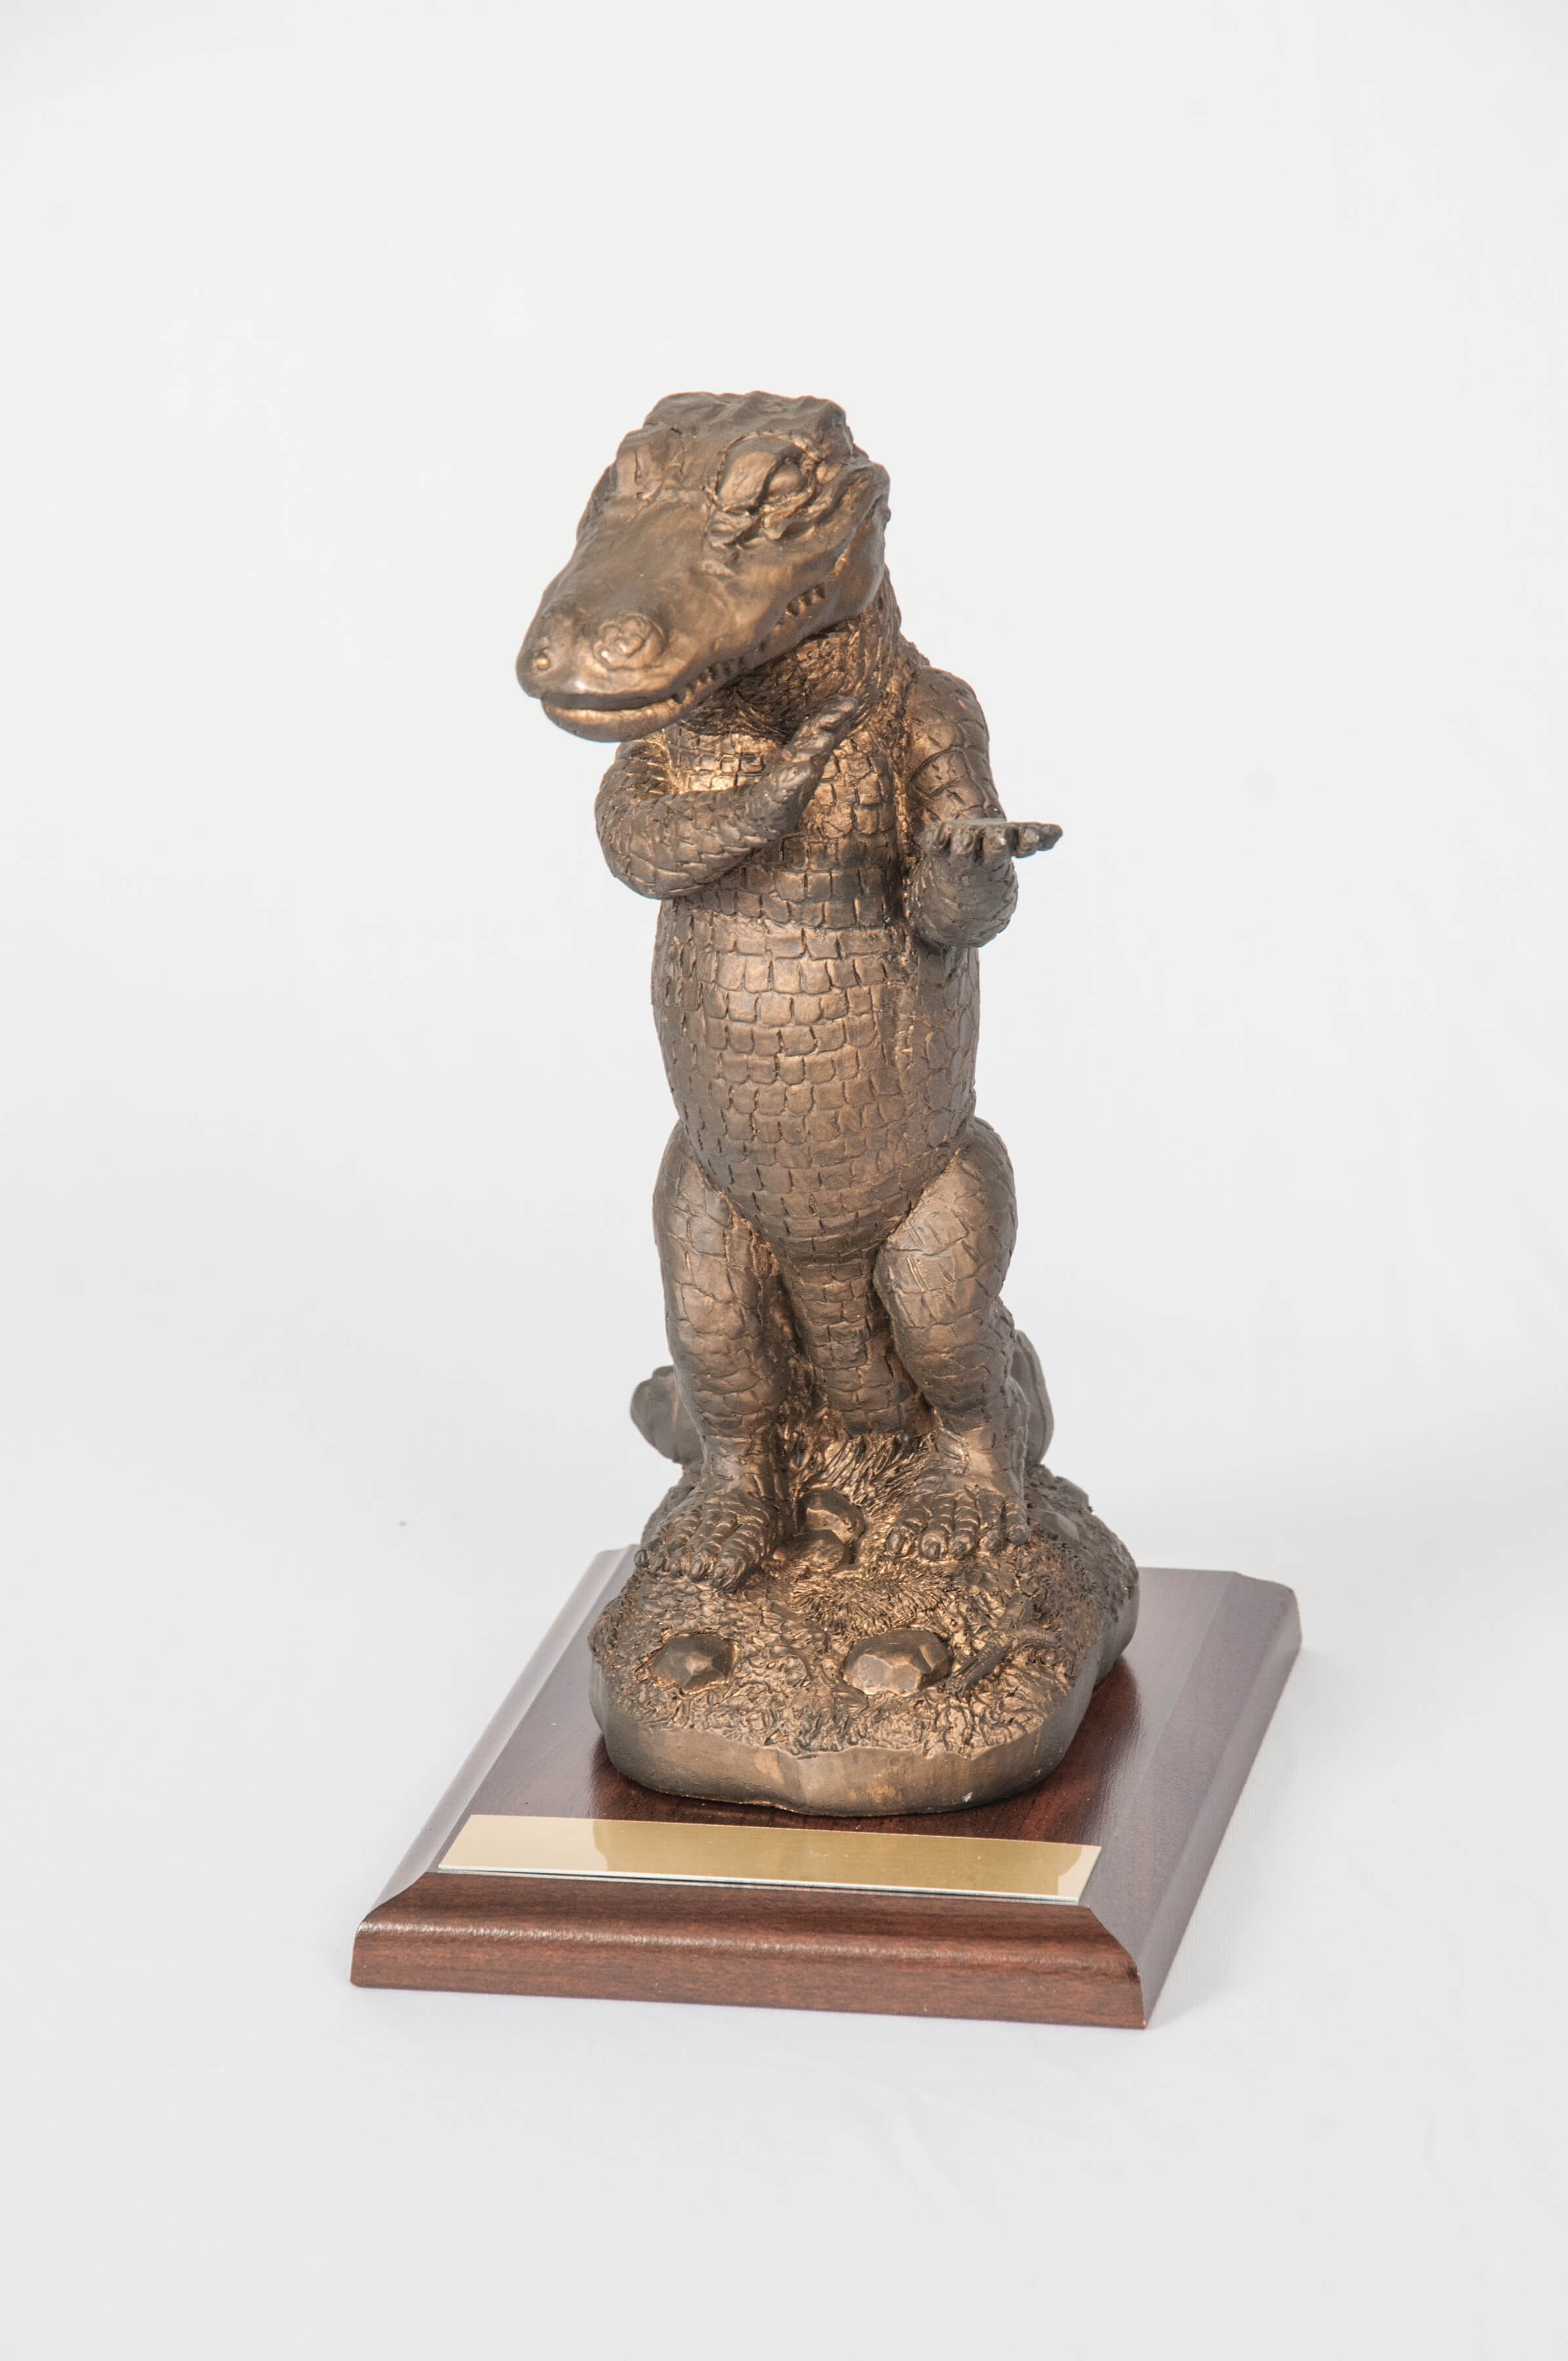 Front standing gator award without cup